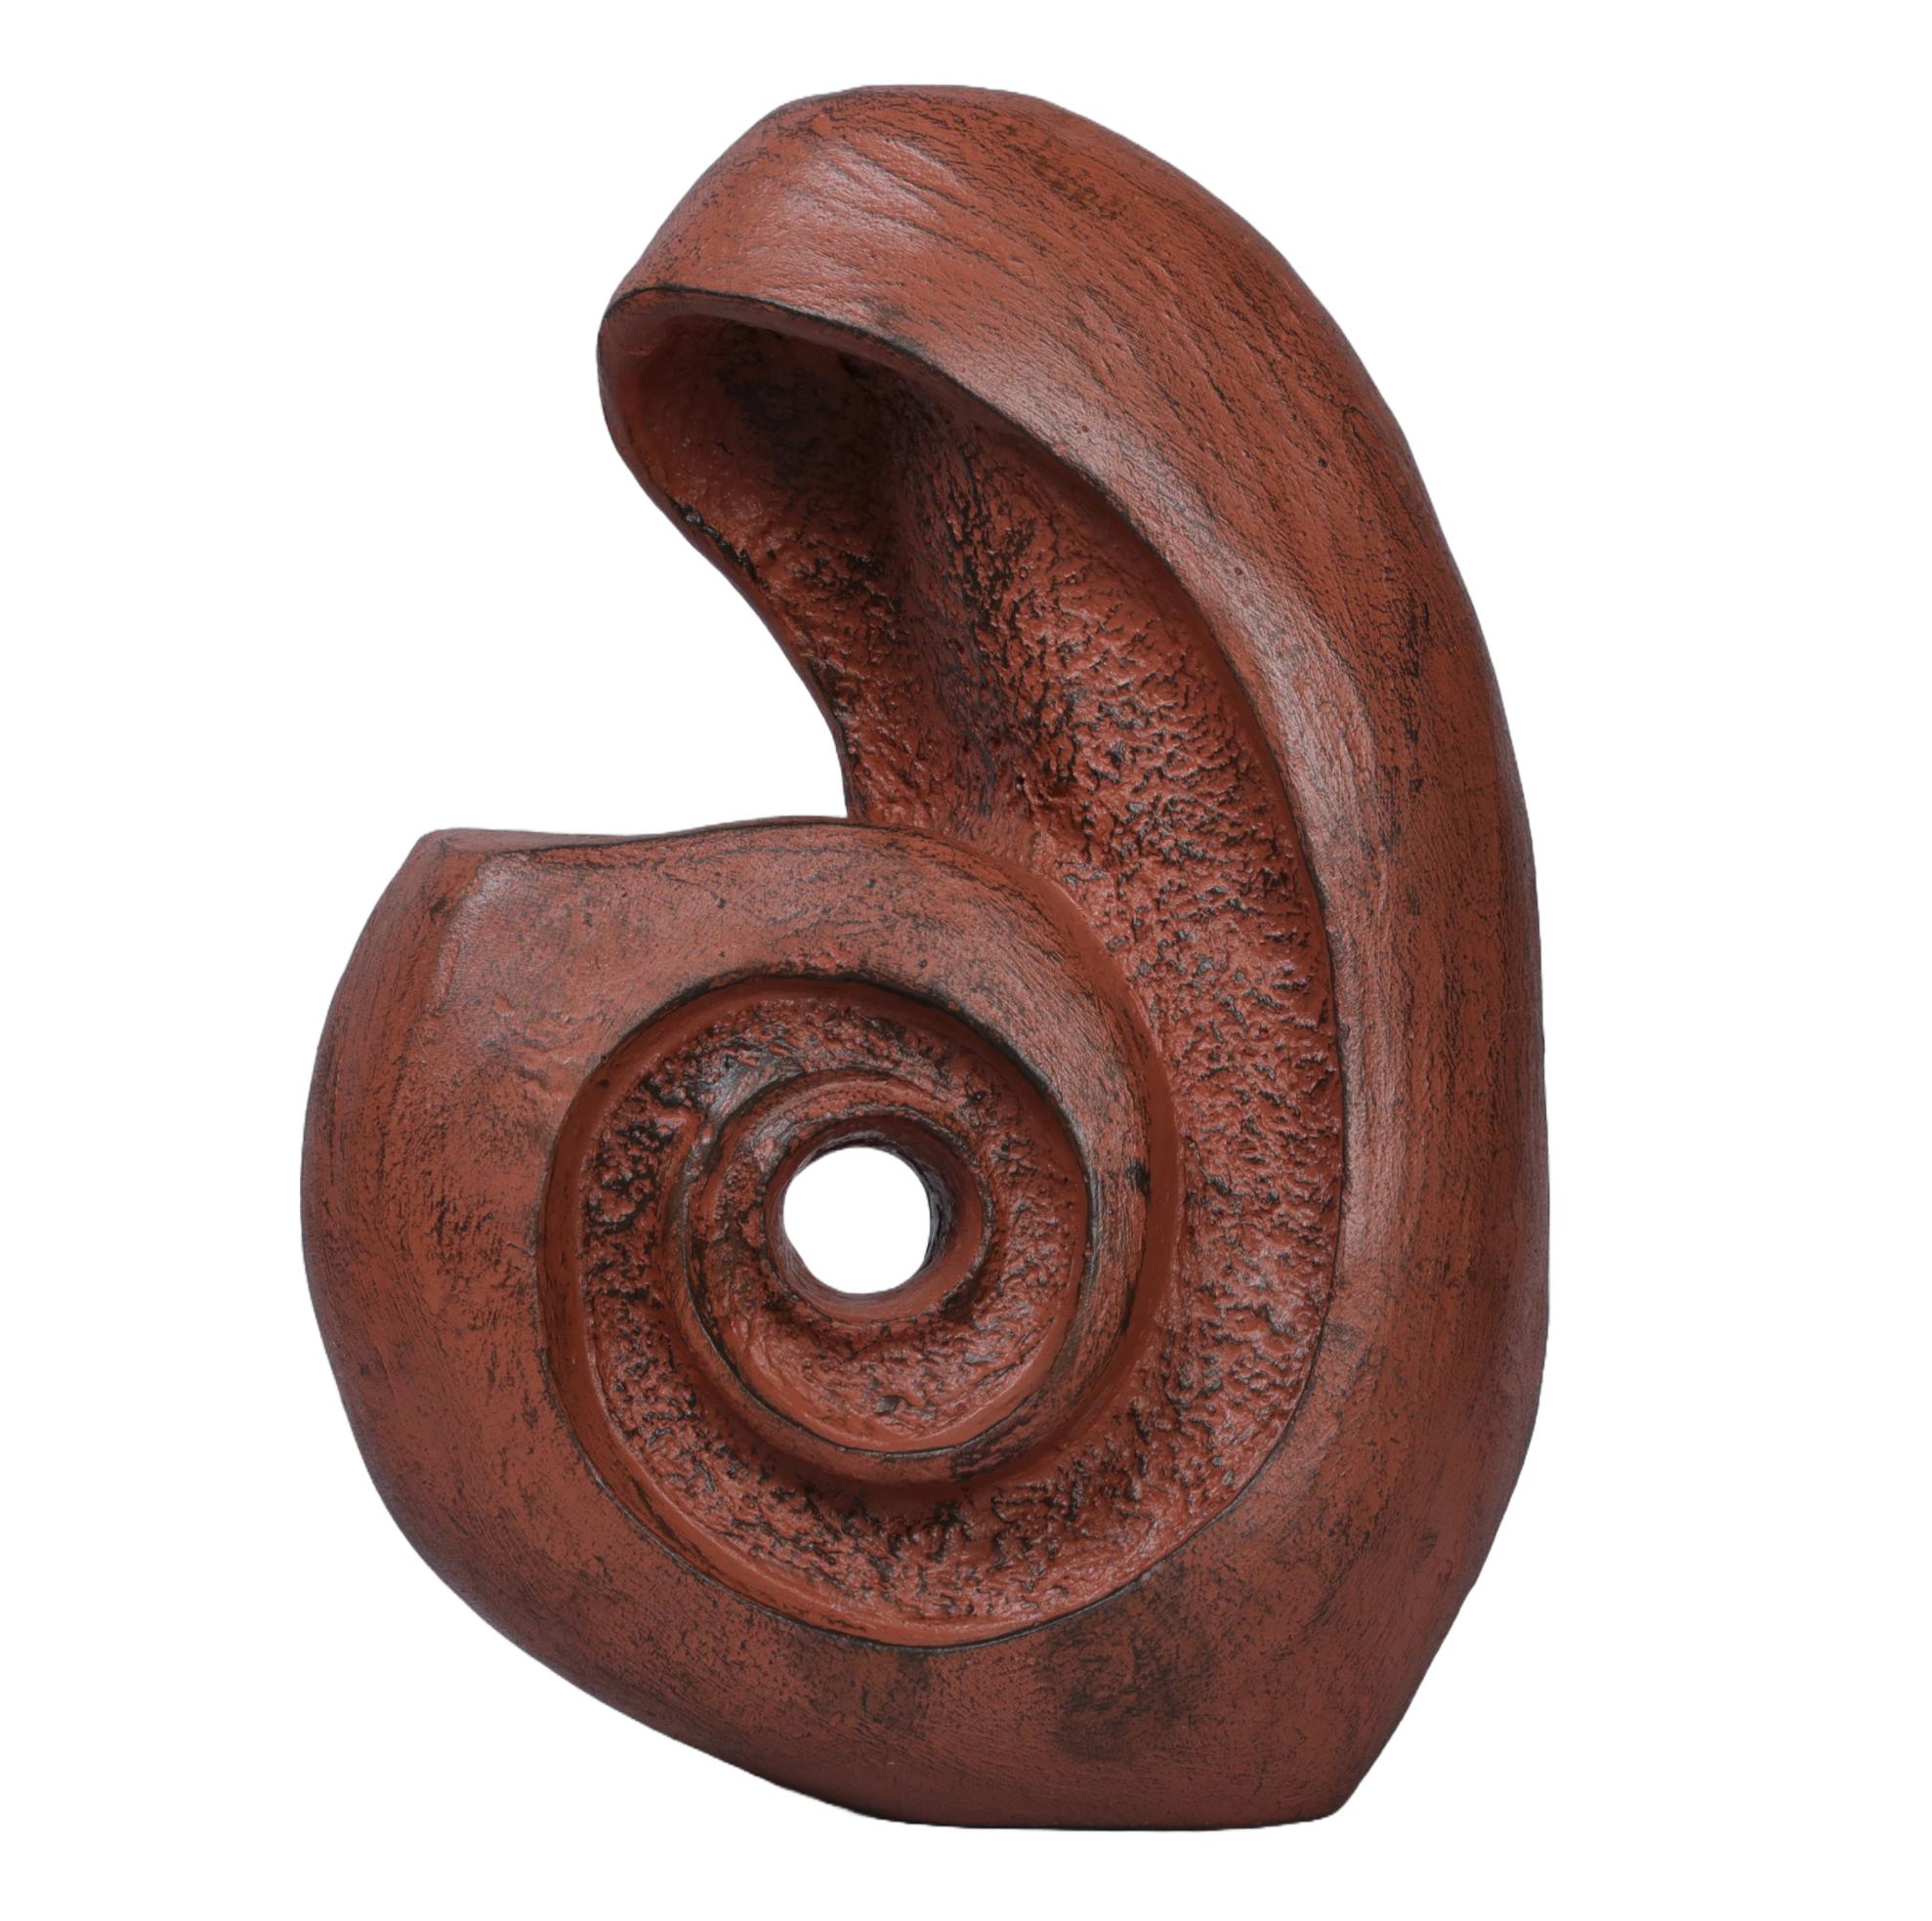 Ashnam Abstract  Modern Swirling Sculpture with Central Void - Terracotta, 25 Cm